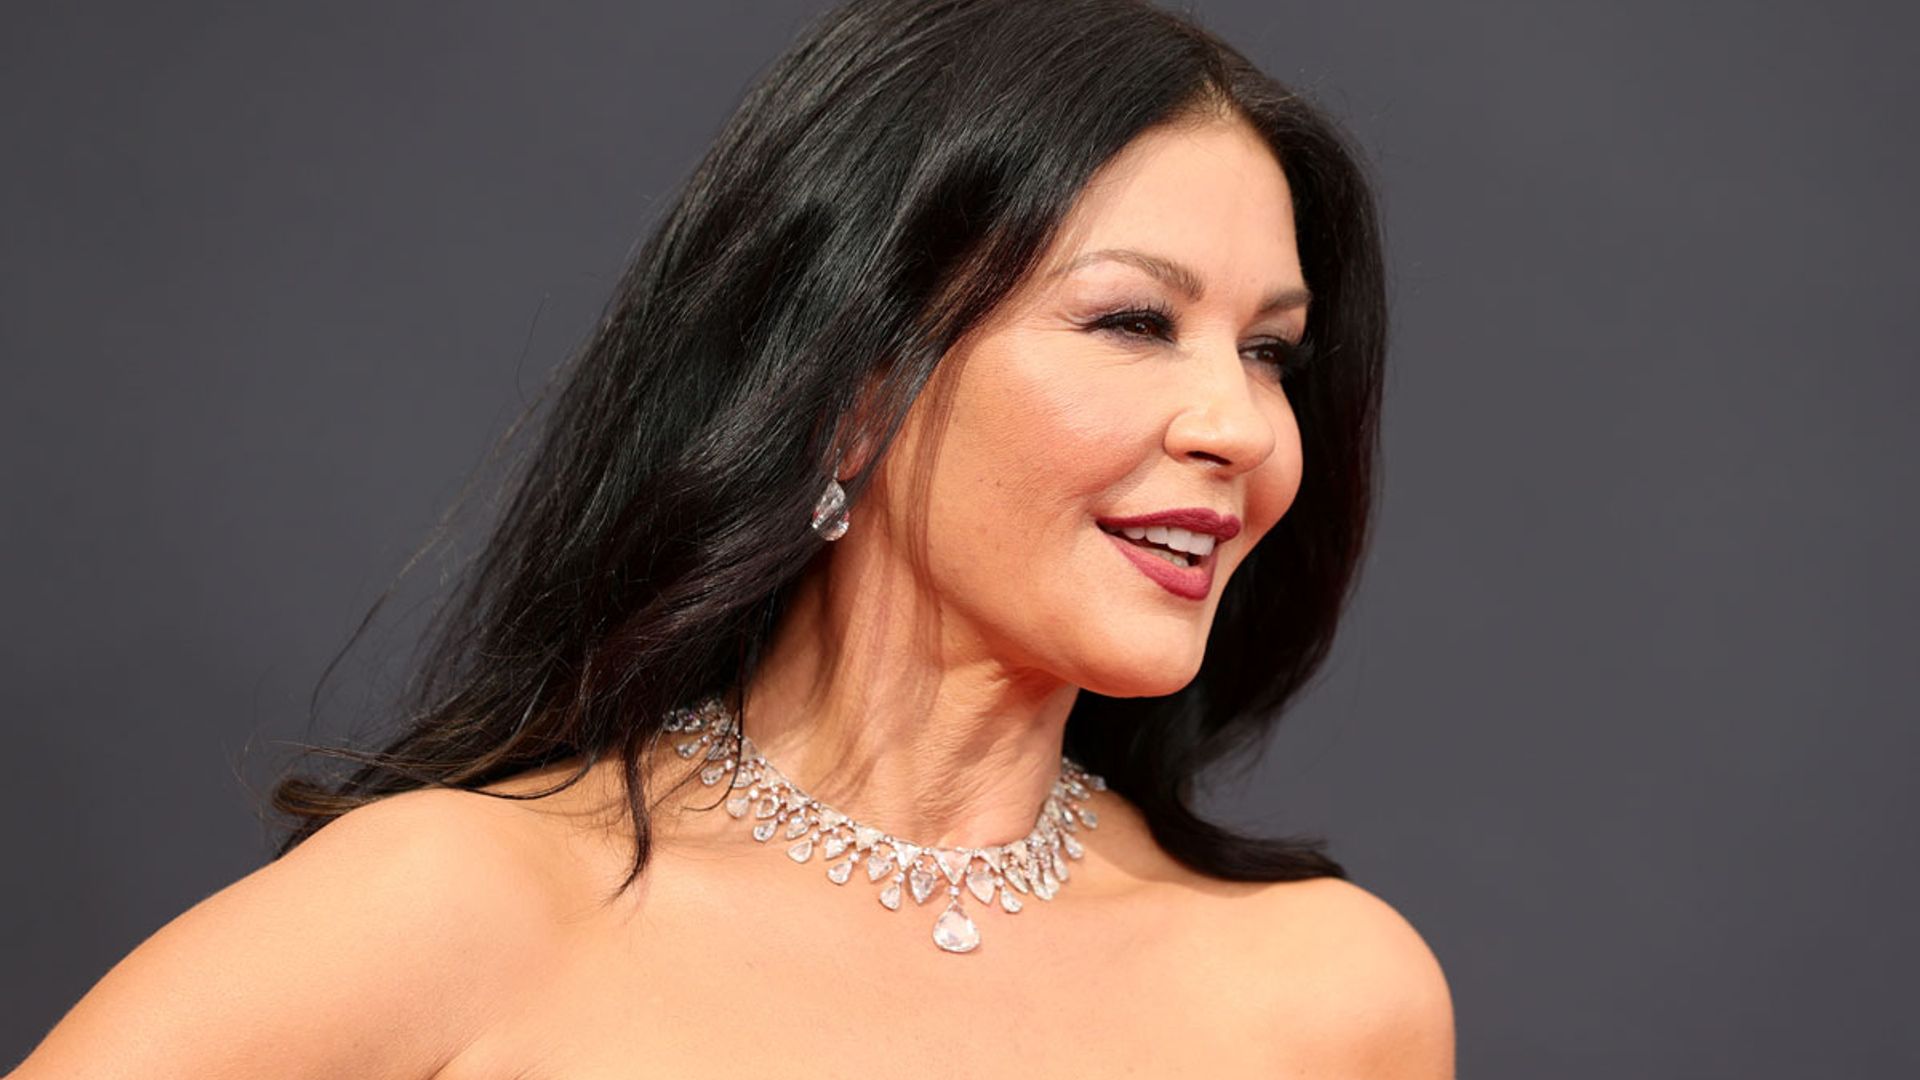 Catherine Zeta-Jones shares secret to her fit physique at 52